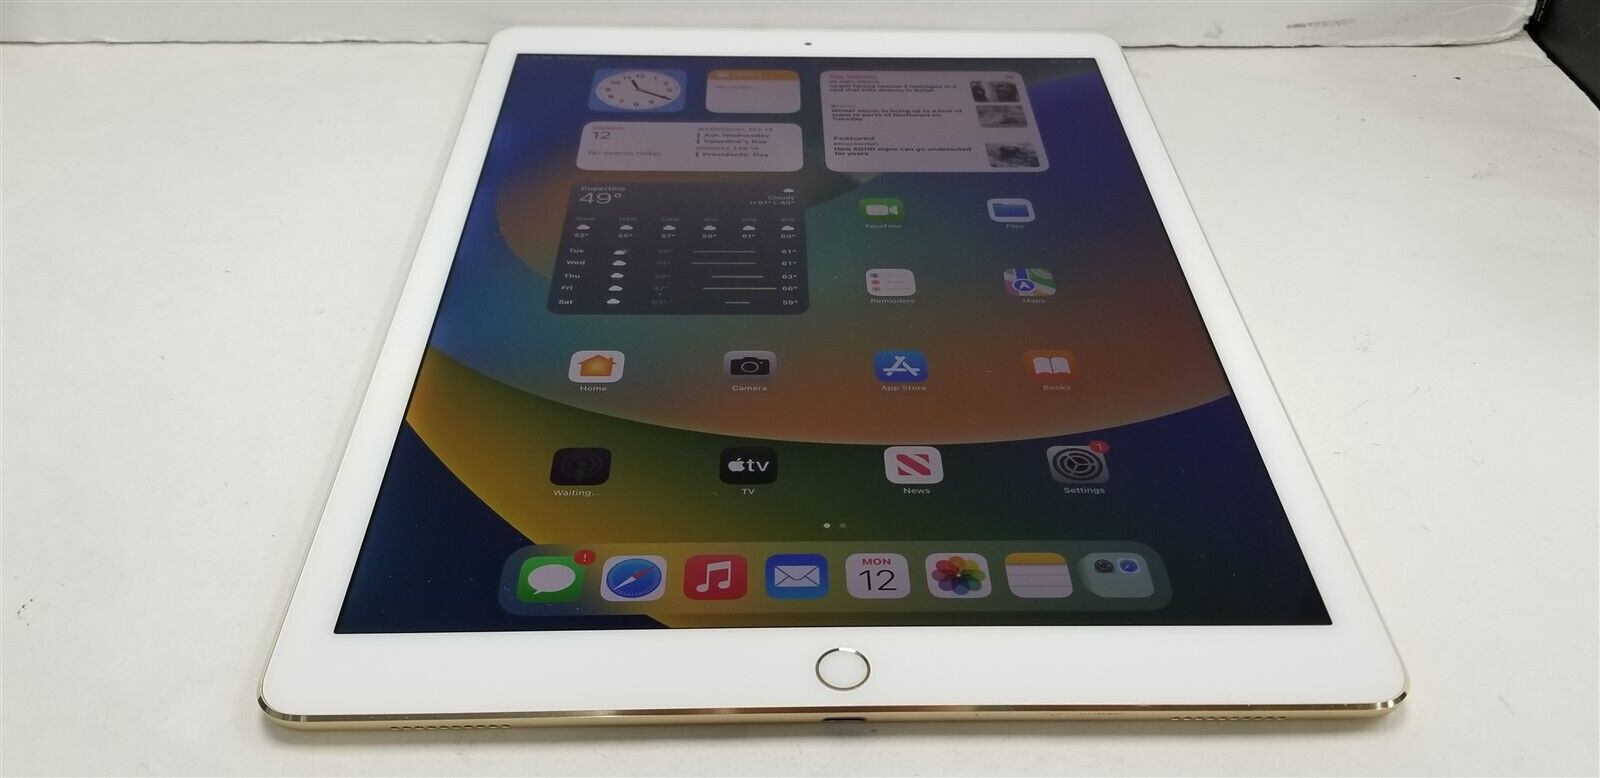 Apple iPad Pro 2nd Gen 64gb Gold A1670 12.9in (WIFI) Reduced Price NW8472